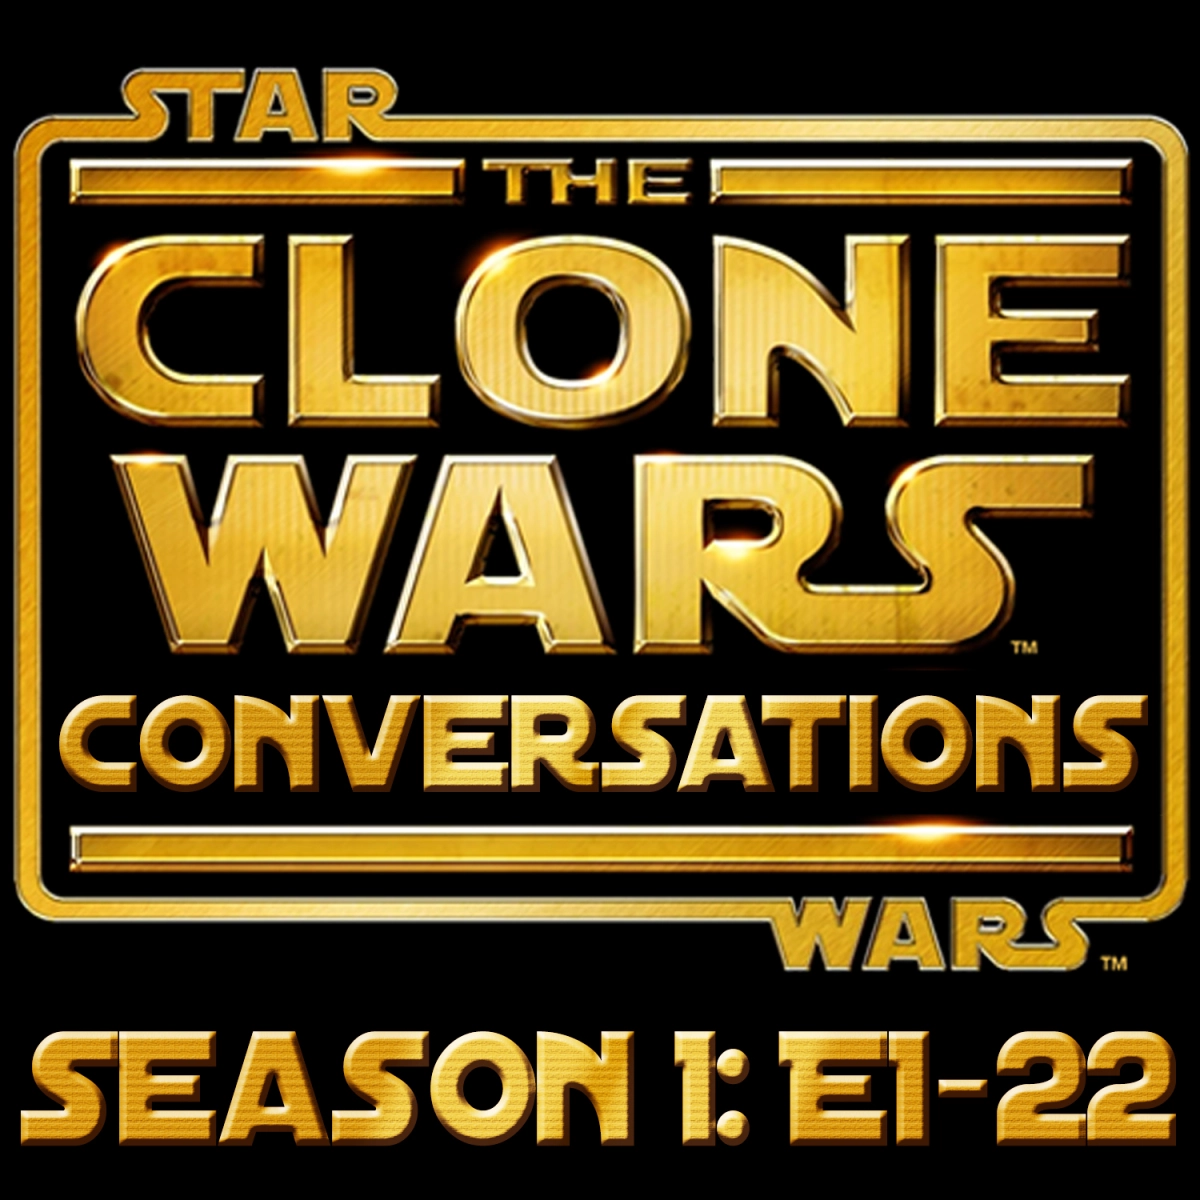 #221 – Clone Wars Conversations Season 1 Reviewed & Ranked: Is This Better Than The Movie? Jar Jar Returns, Dodgy Animation & Clone Individuality